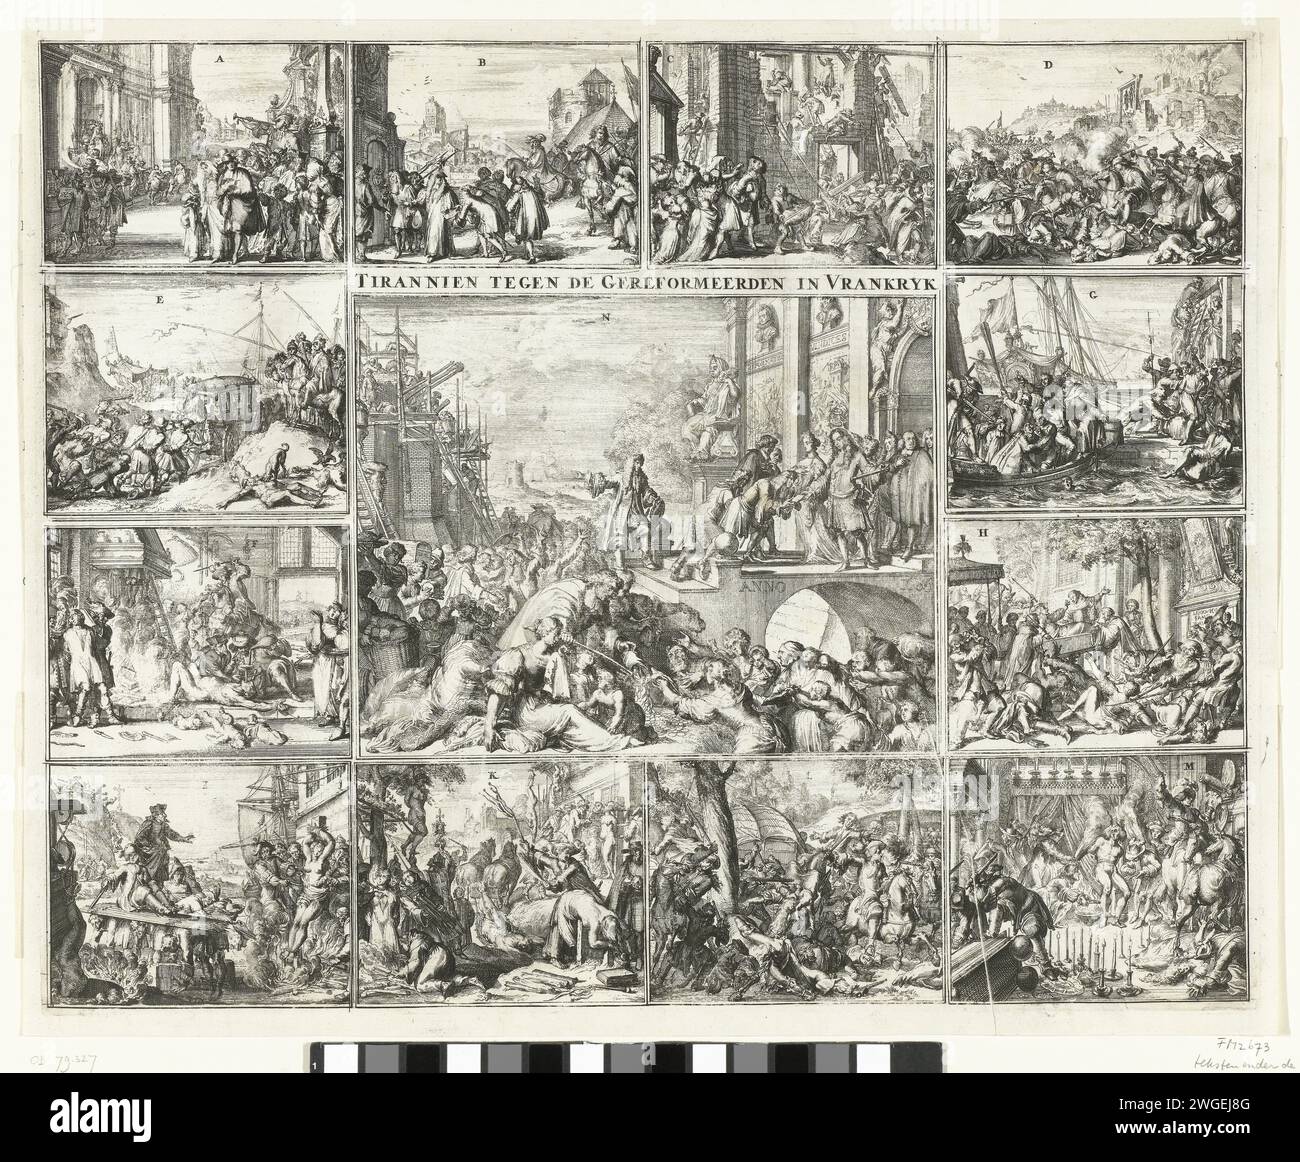 Persecution of the Protestants in France after the revocation of the Edict van Nantes, 1685-1686, 1686 print Persecution of the Protestants in France after the revocation of the Edict van Nantes, 1685-1686. Twelve small scenes illustrate the persecution of and the atrocities of the Huguenots in France. In the central large performance, the States and the Prince of Orange receive the French refugees in the Netherlands. The performances numbered A-N. Hereby two text magazines. Northern Netherlands paper etching execution of heretic, e.g. by burning at the stake, 'auto-da-fé'. violent death, bein Stock Photo